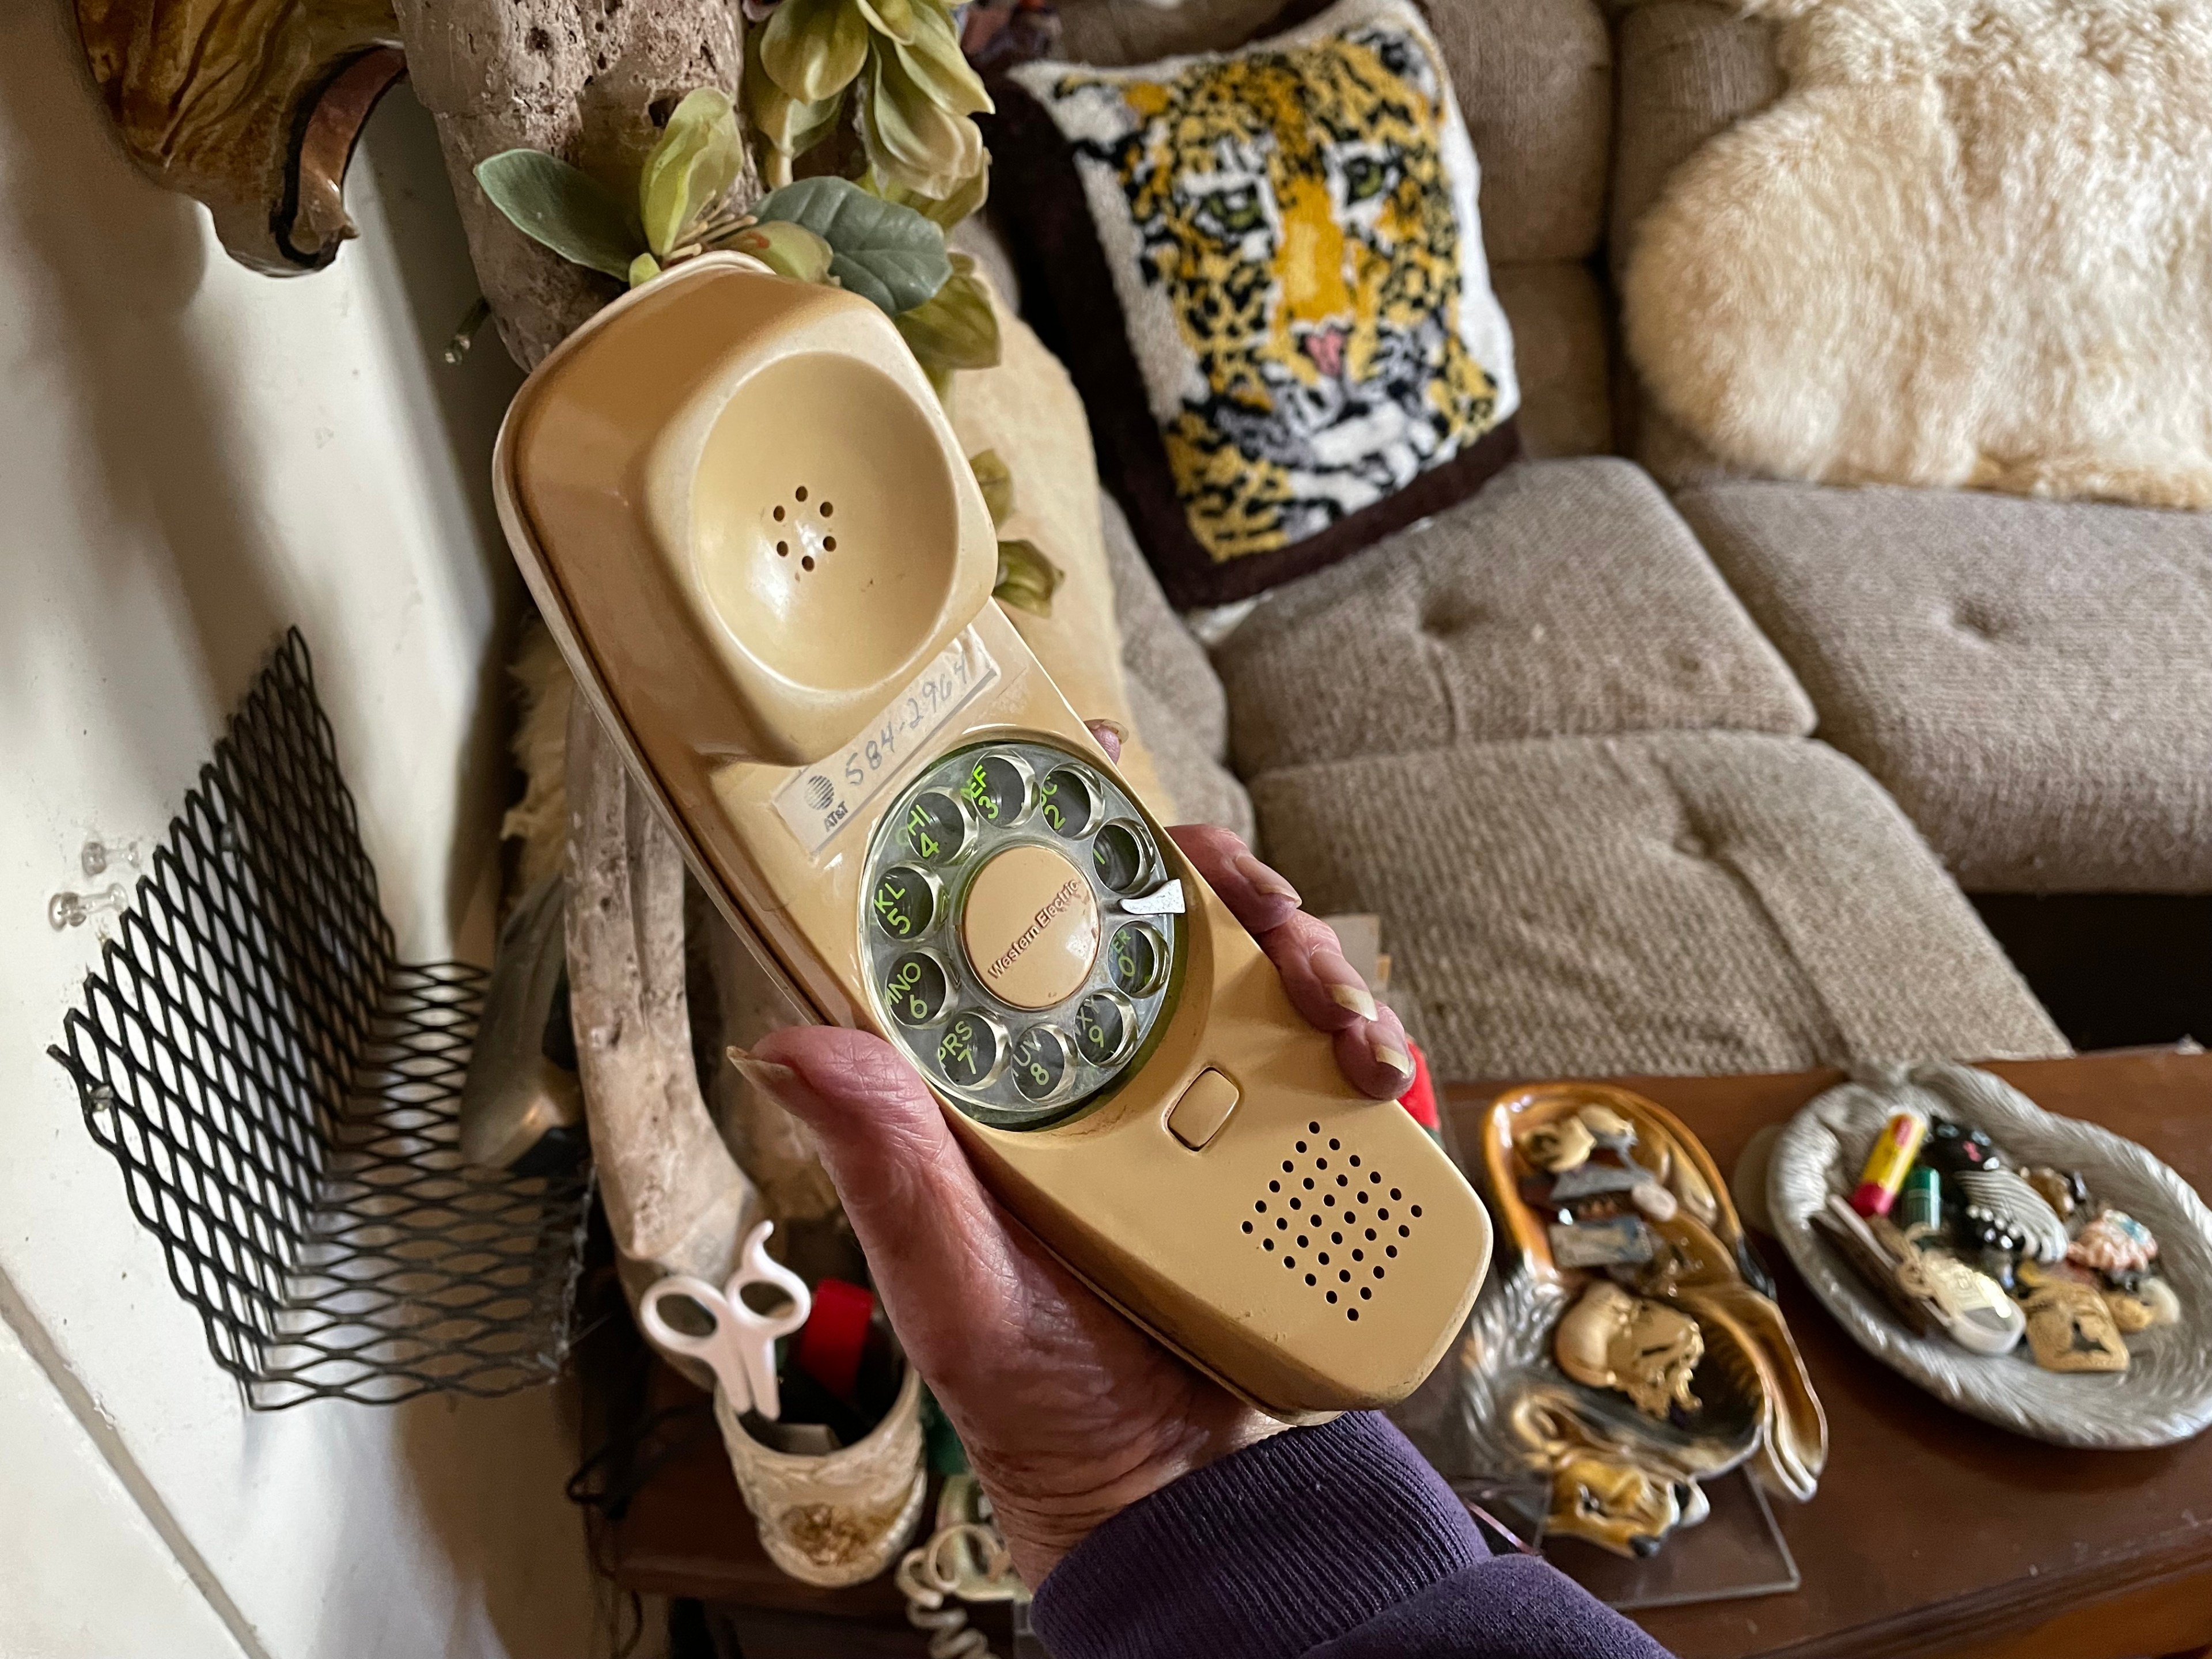 An old woman shows a landline phone's rotary dial.